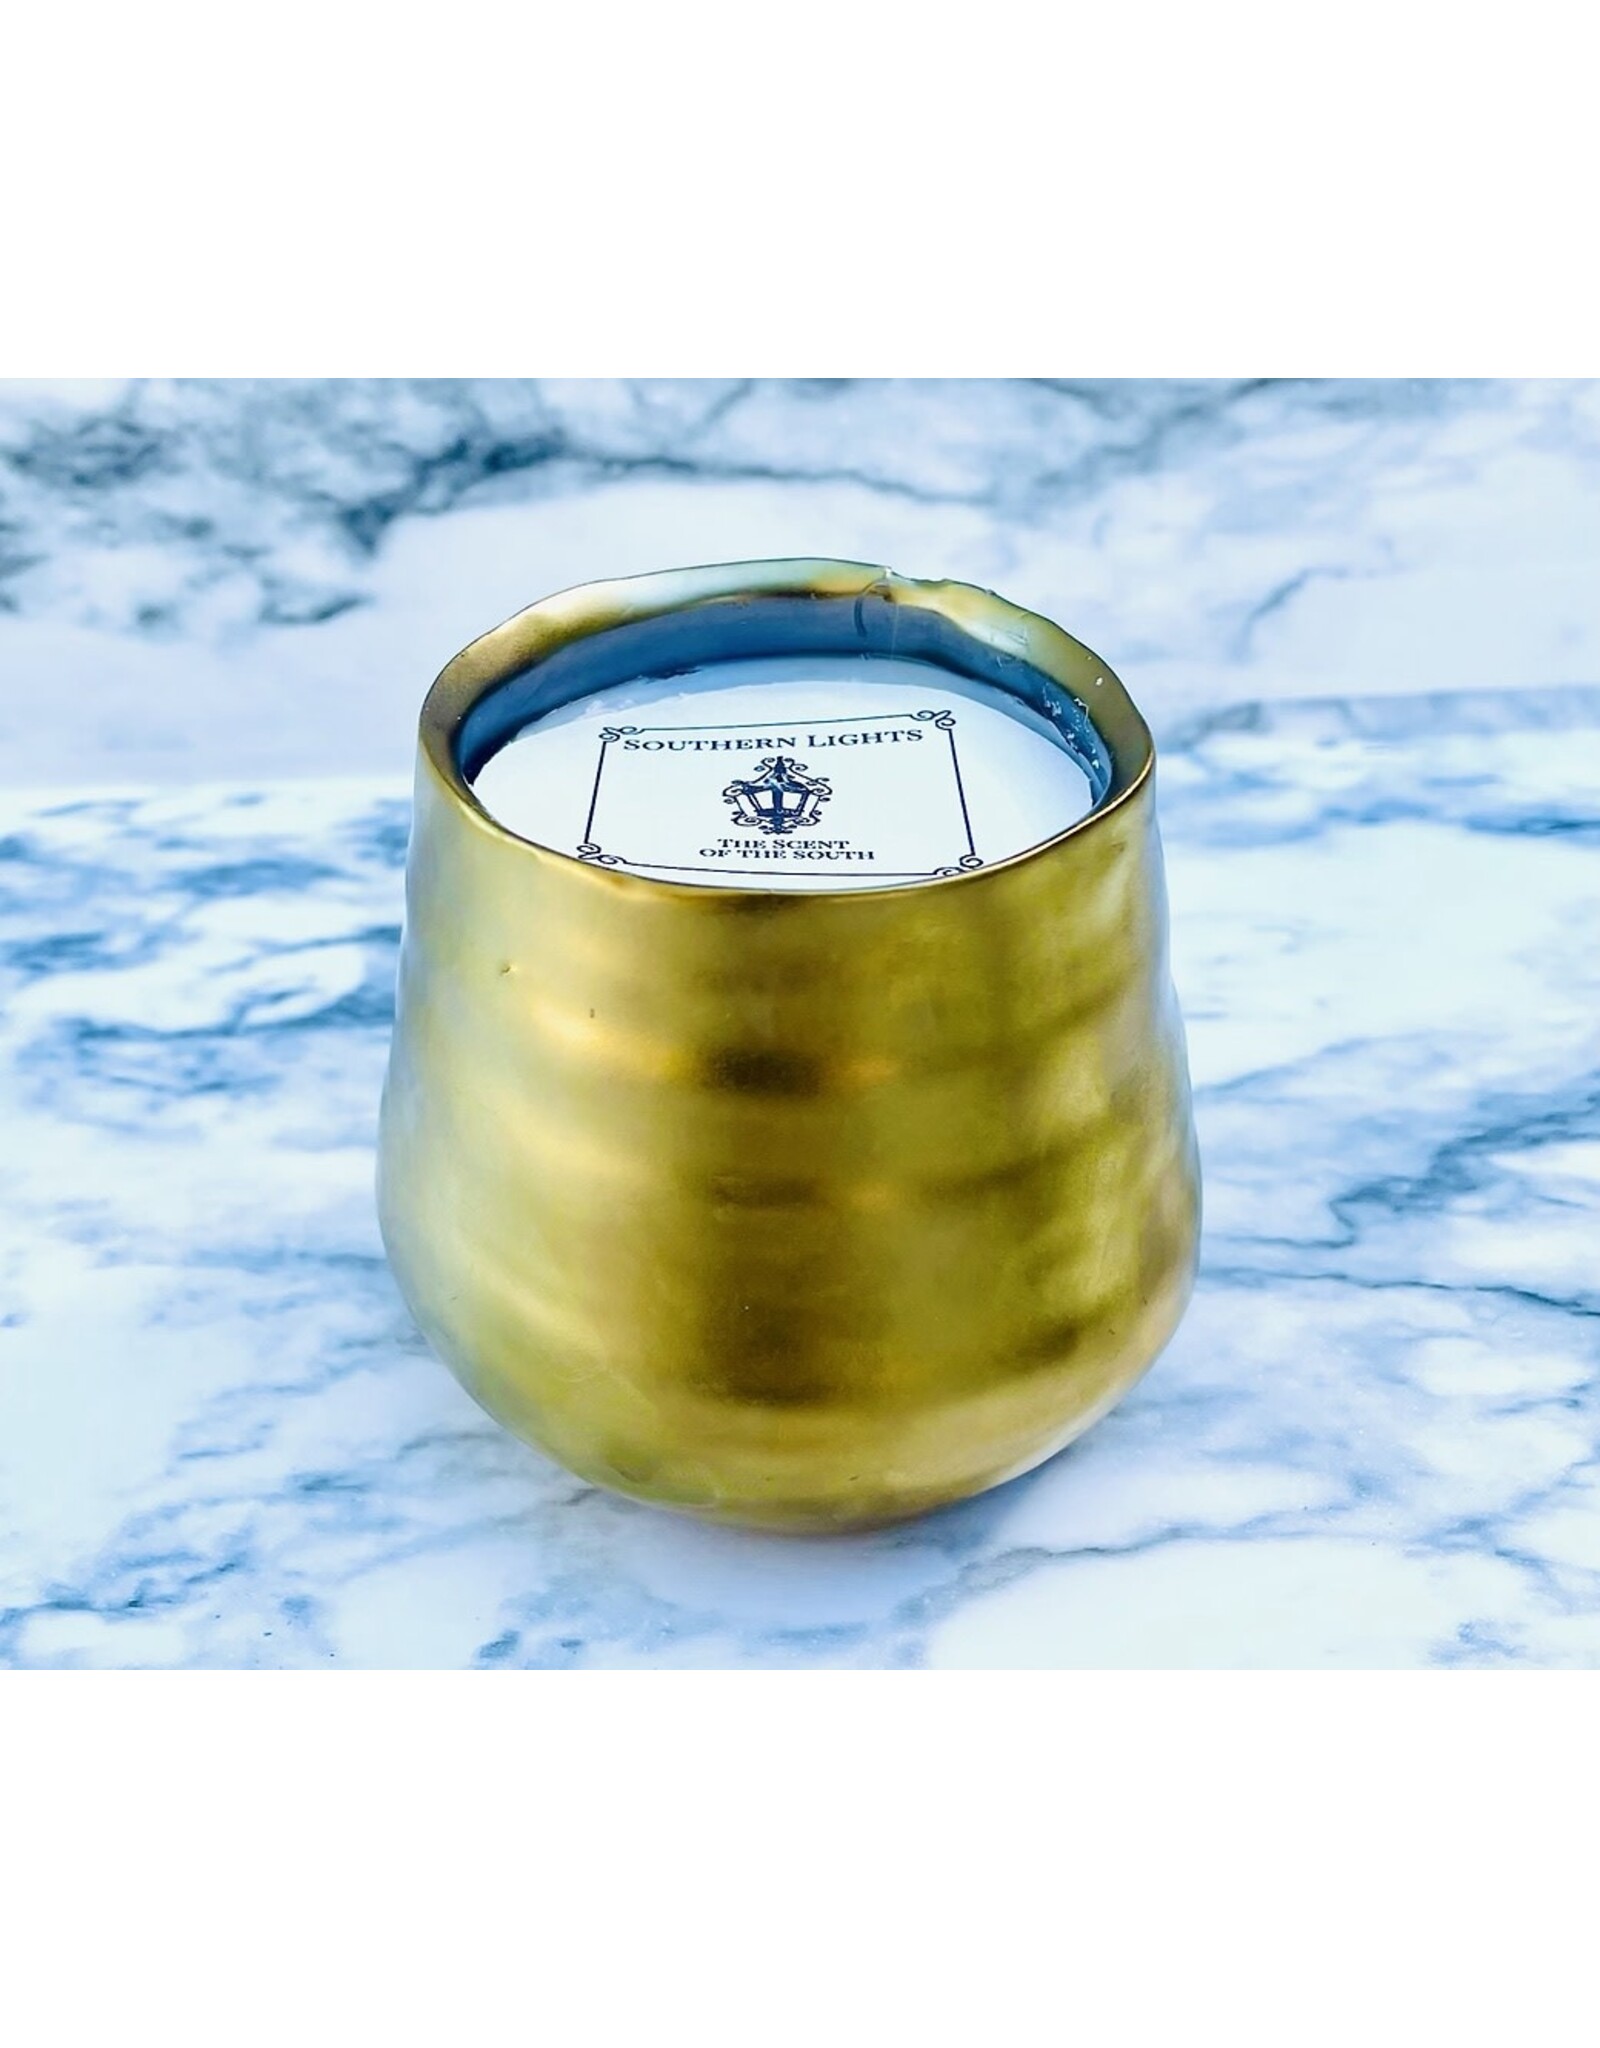 Southern Lights Candle Christmas Splendor Gold Ceramic Candle